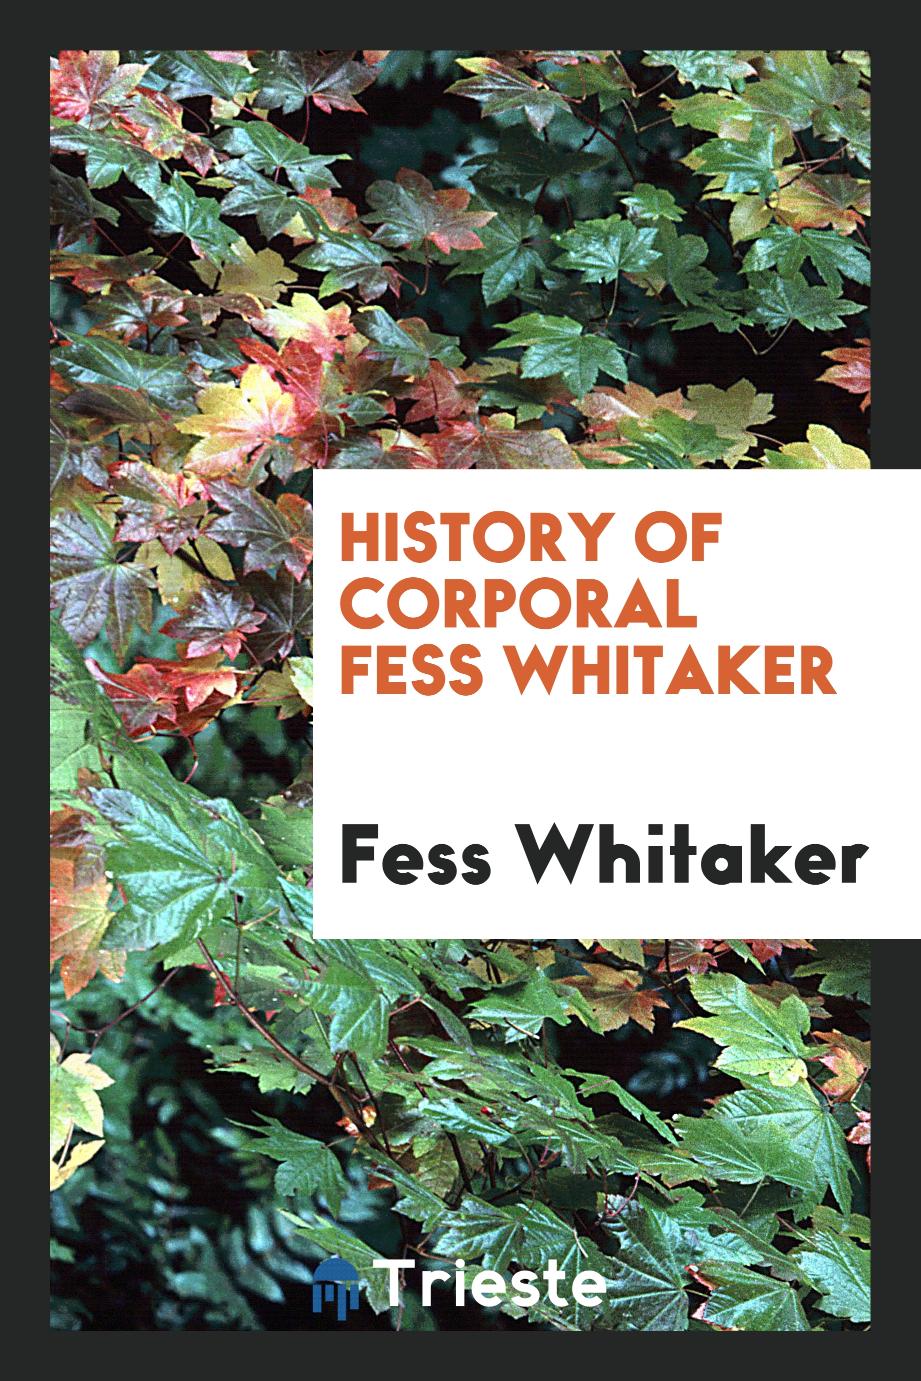 History of Corporal Fess Whitaker